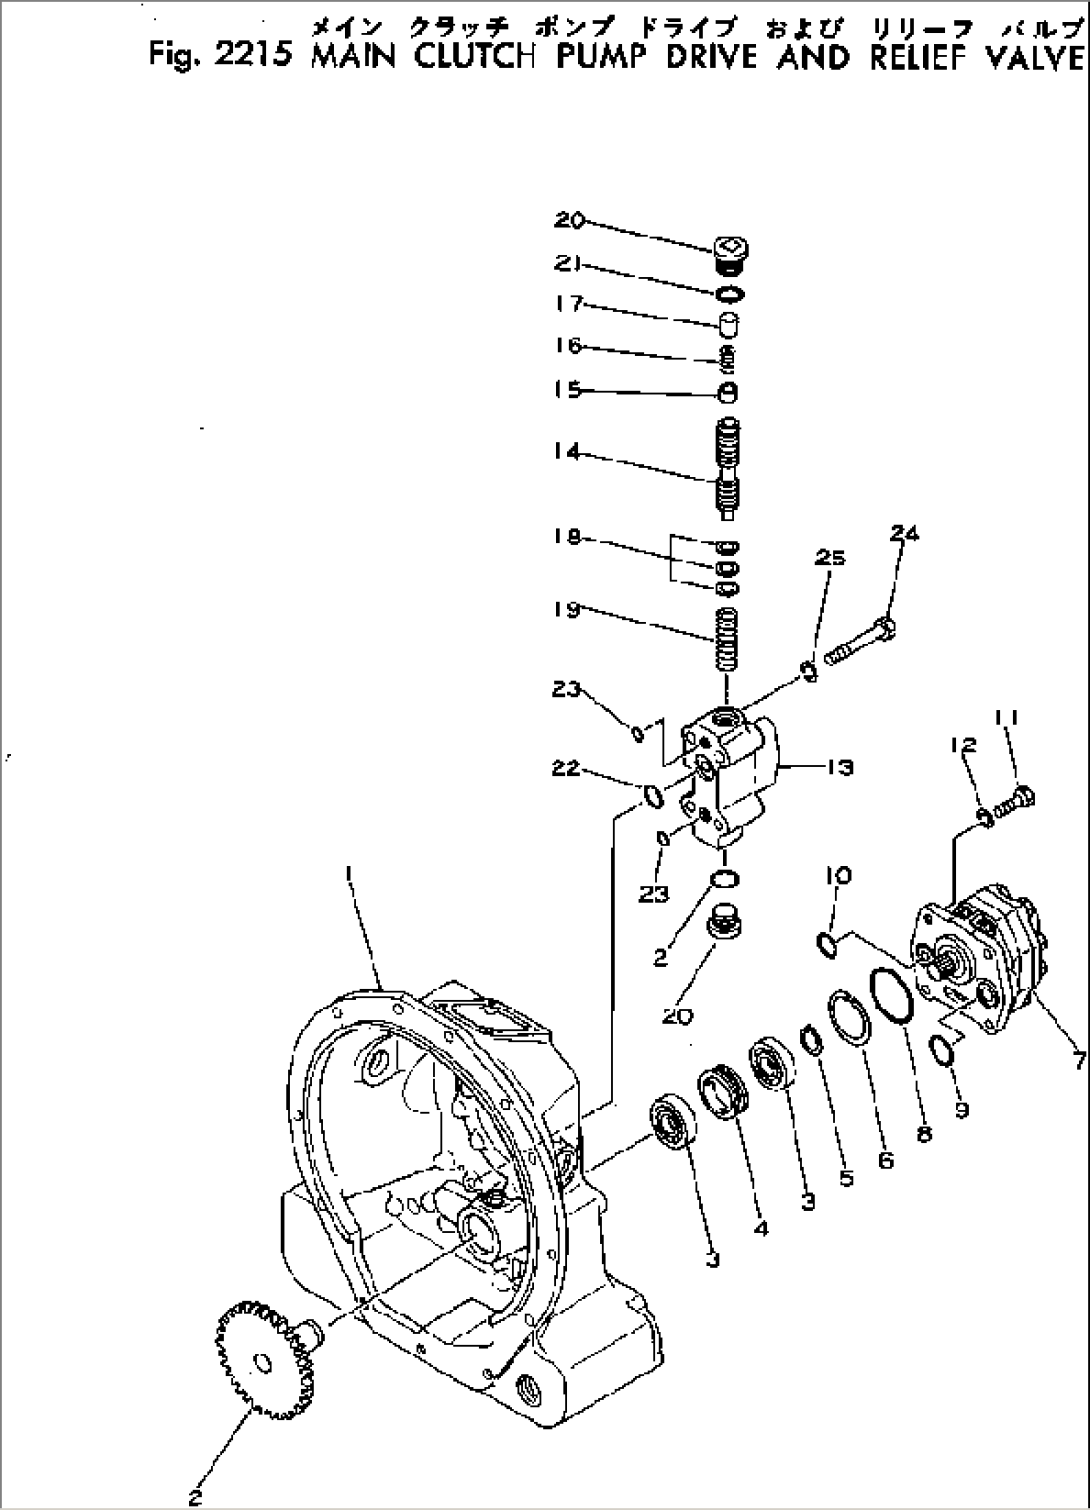 MAIN CLUTCH PUMP DRIVE AND RELIEF VALVE